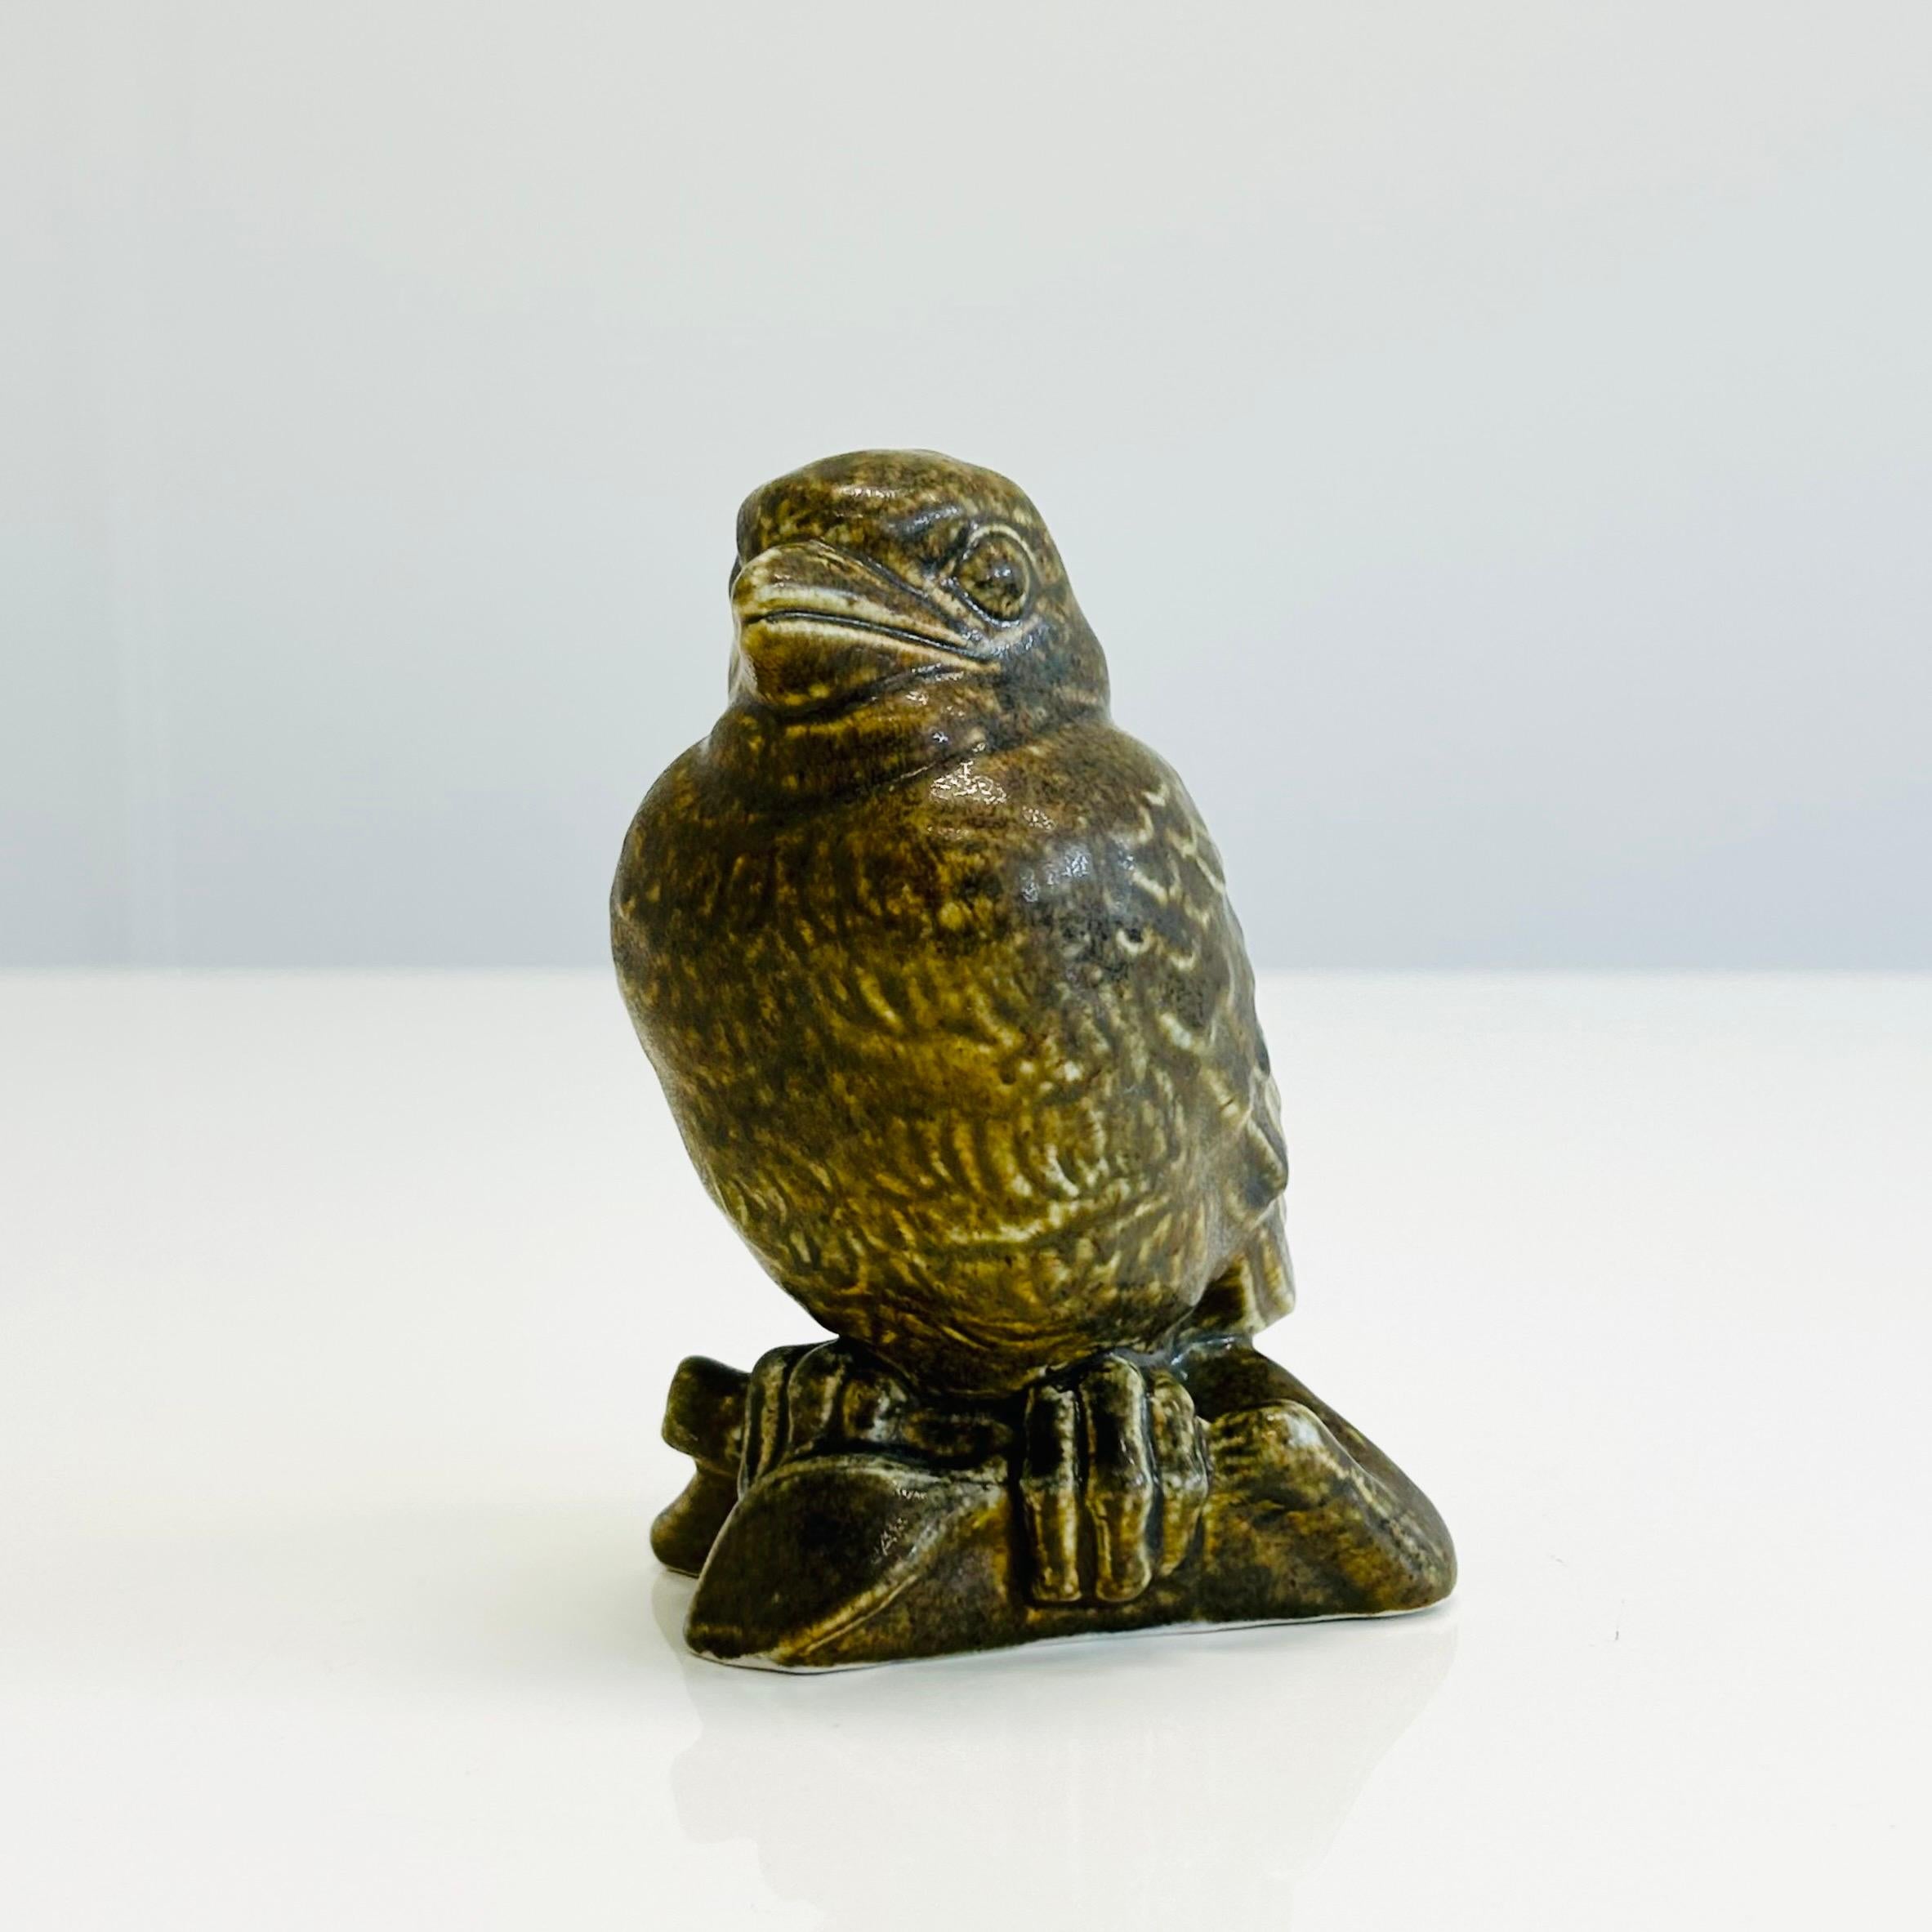 A rare stoneware bird by Svend Aage Holm Sørensen made in the in the 1950s. A perfect detail. 

* A stoneware desk bird with brown glaze 
* Designer: Svend Aage Holm Sørensen
* Year: est. 1950s 
* Condition: Excellent vintage condition. Designers